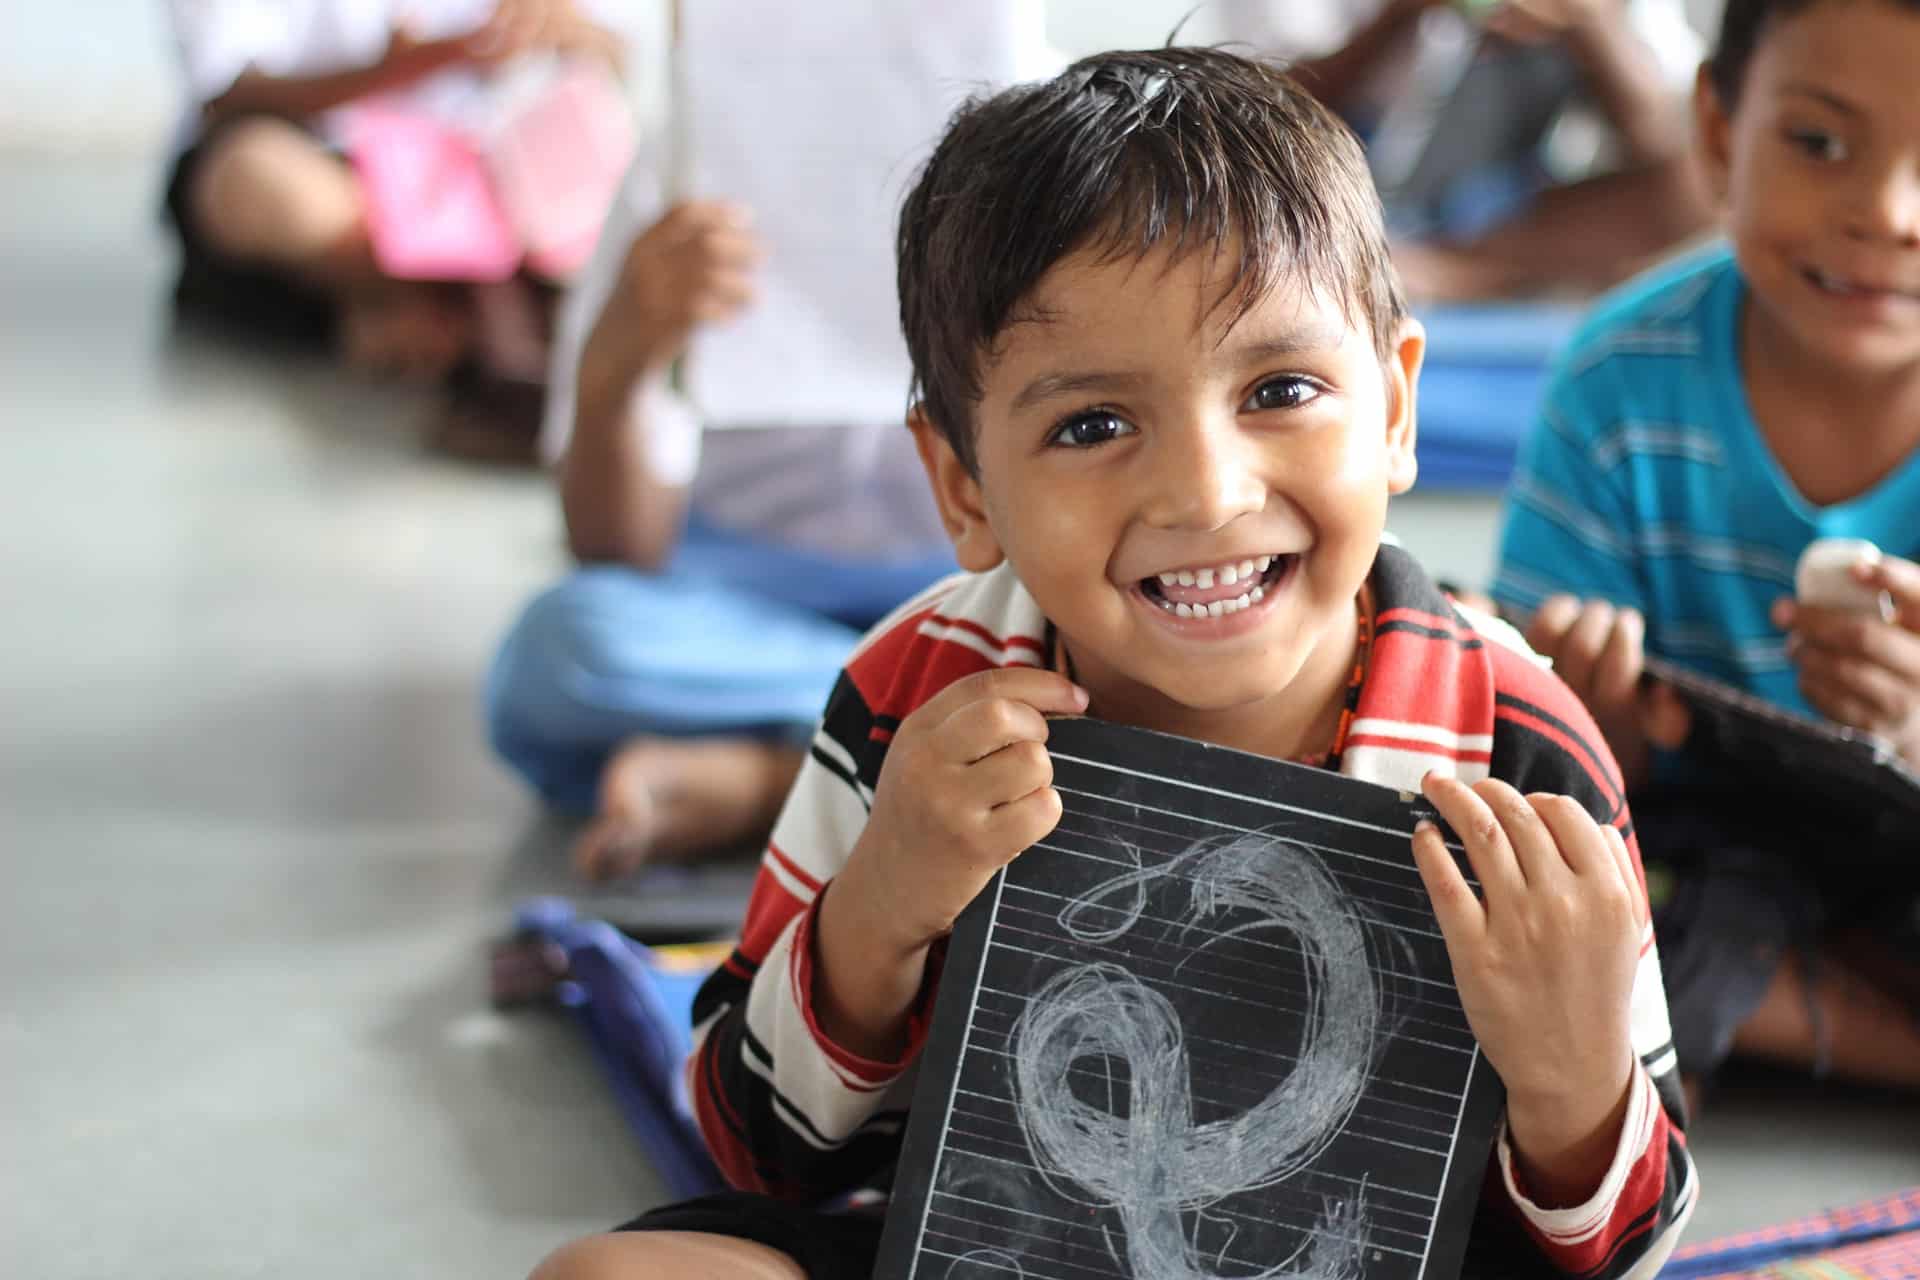 Less than 50 per cent of Indian children can cope with curriculum: Smile Foundation